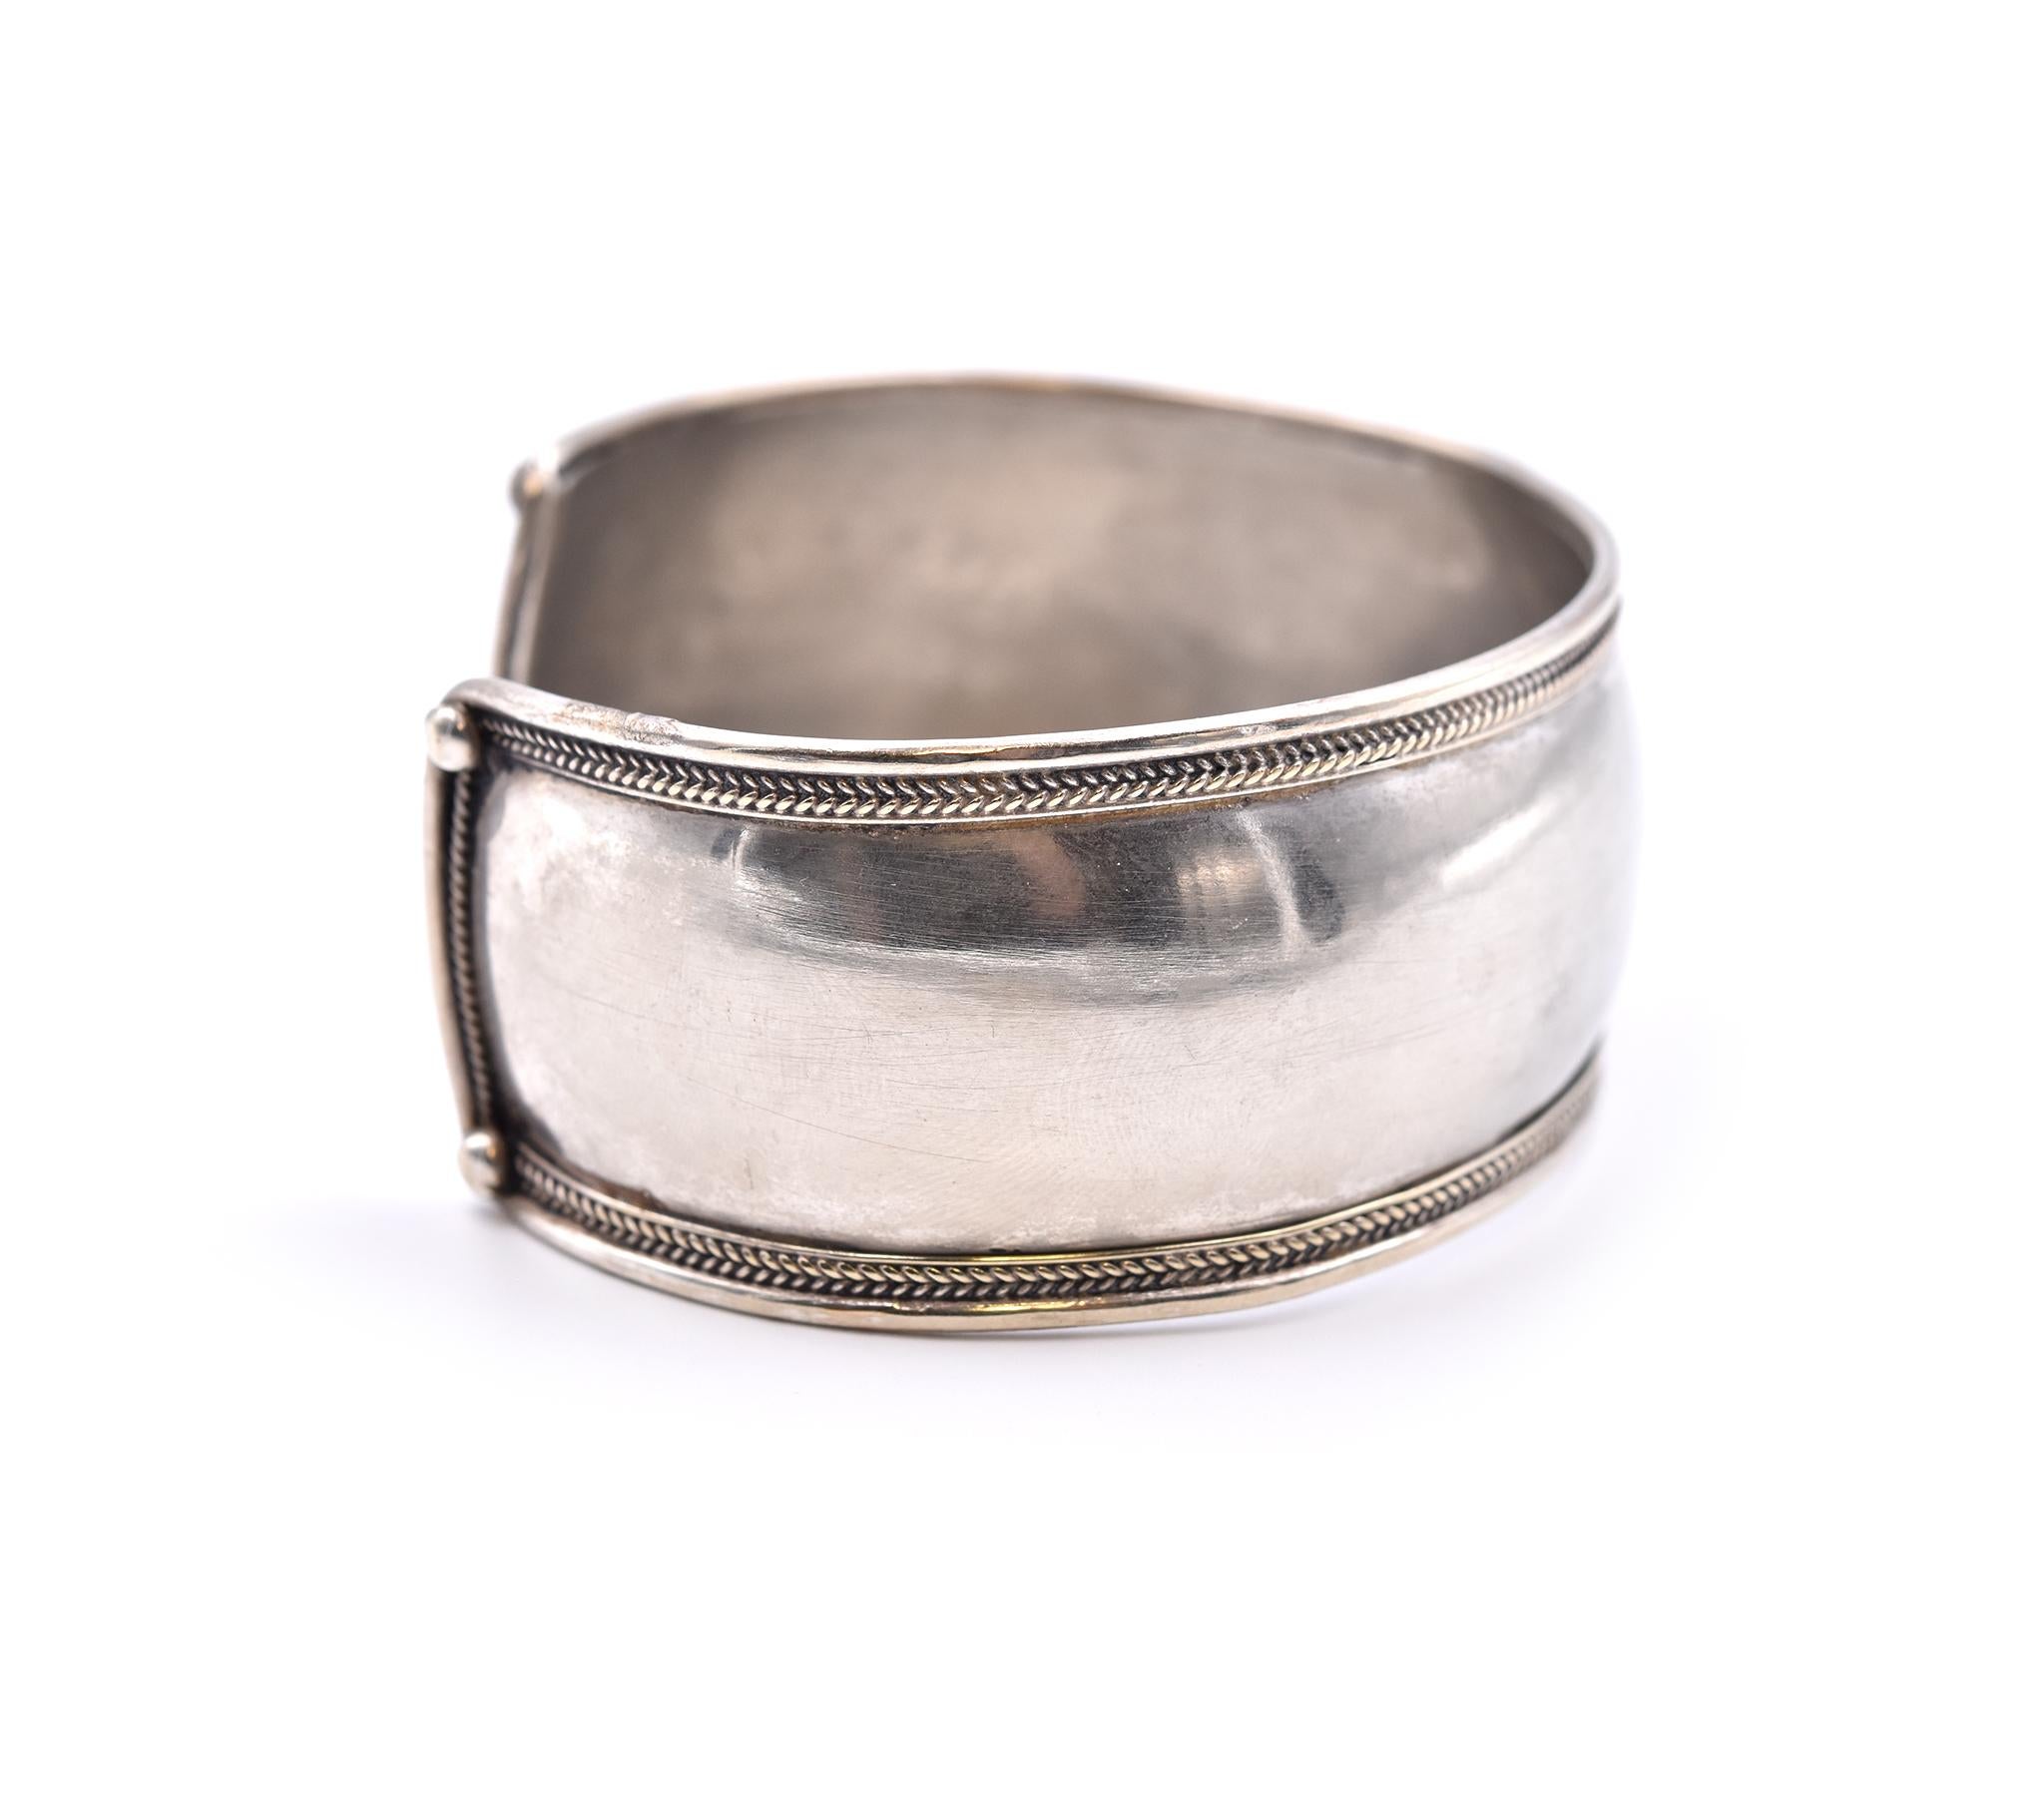 Designer: custom
Material: sterling silver
Dimensions: cuff will fit up to a 7.5-inch wrist, cuff measures 28mm wide
Weight: 20.9 grams